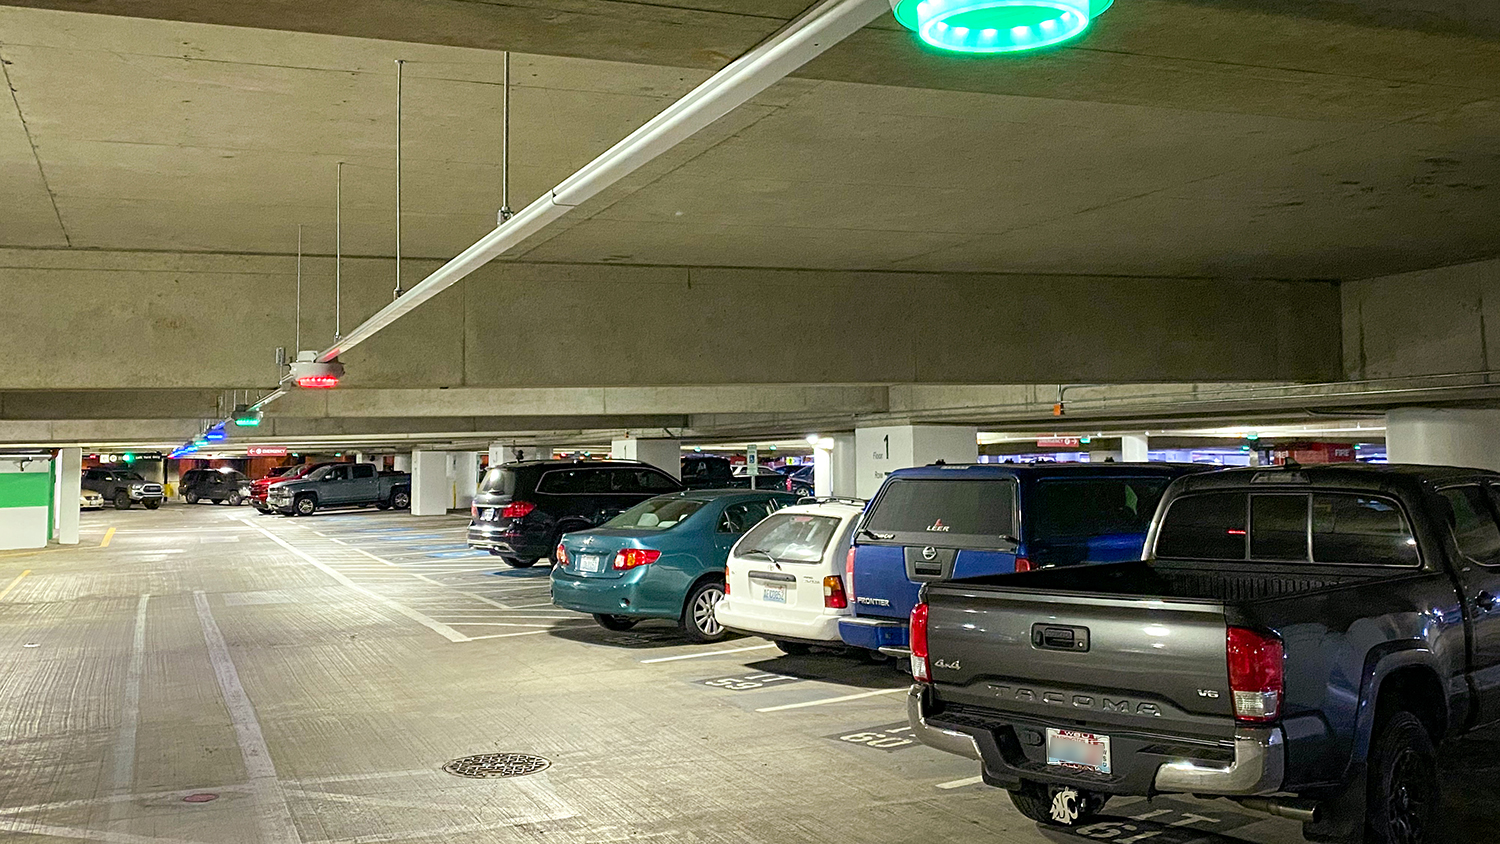 SEA Airport Parking Rate Increase Supports Garage Improvements